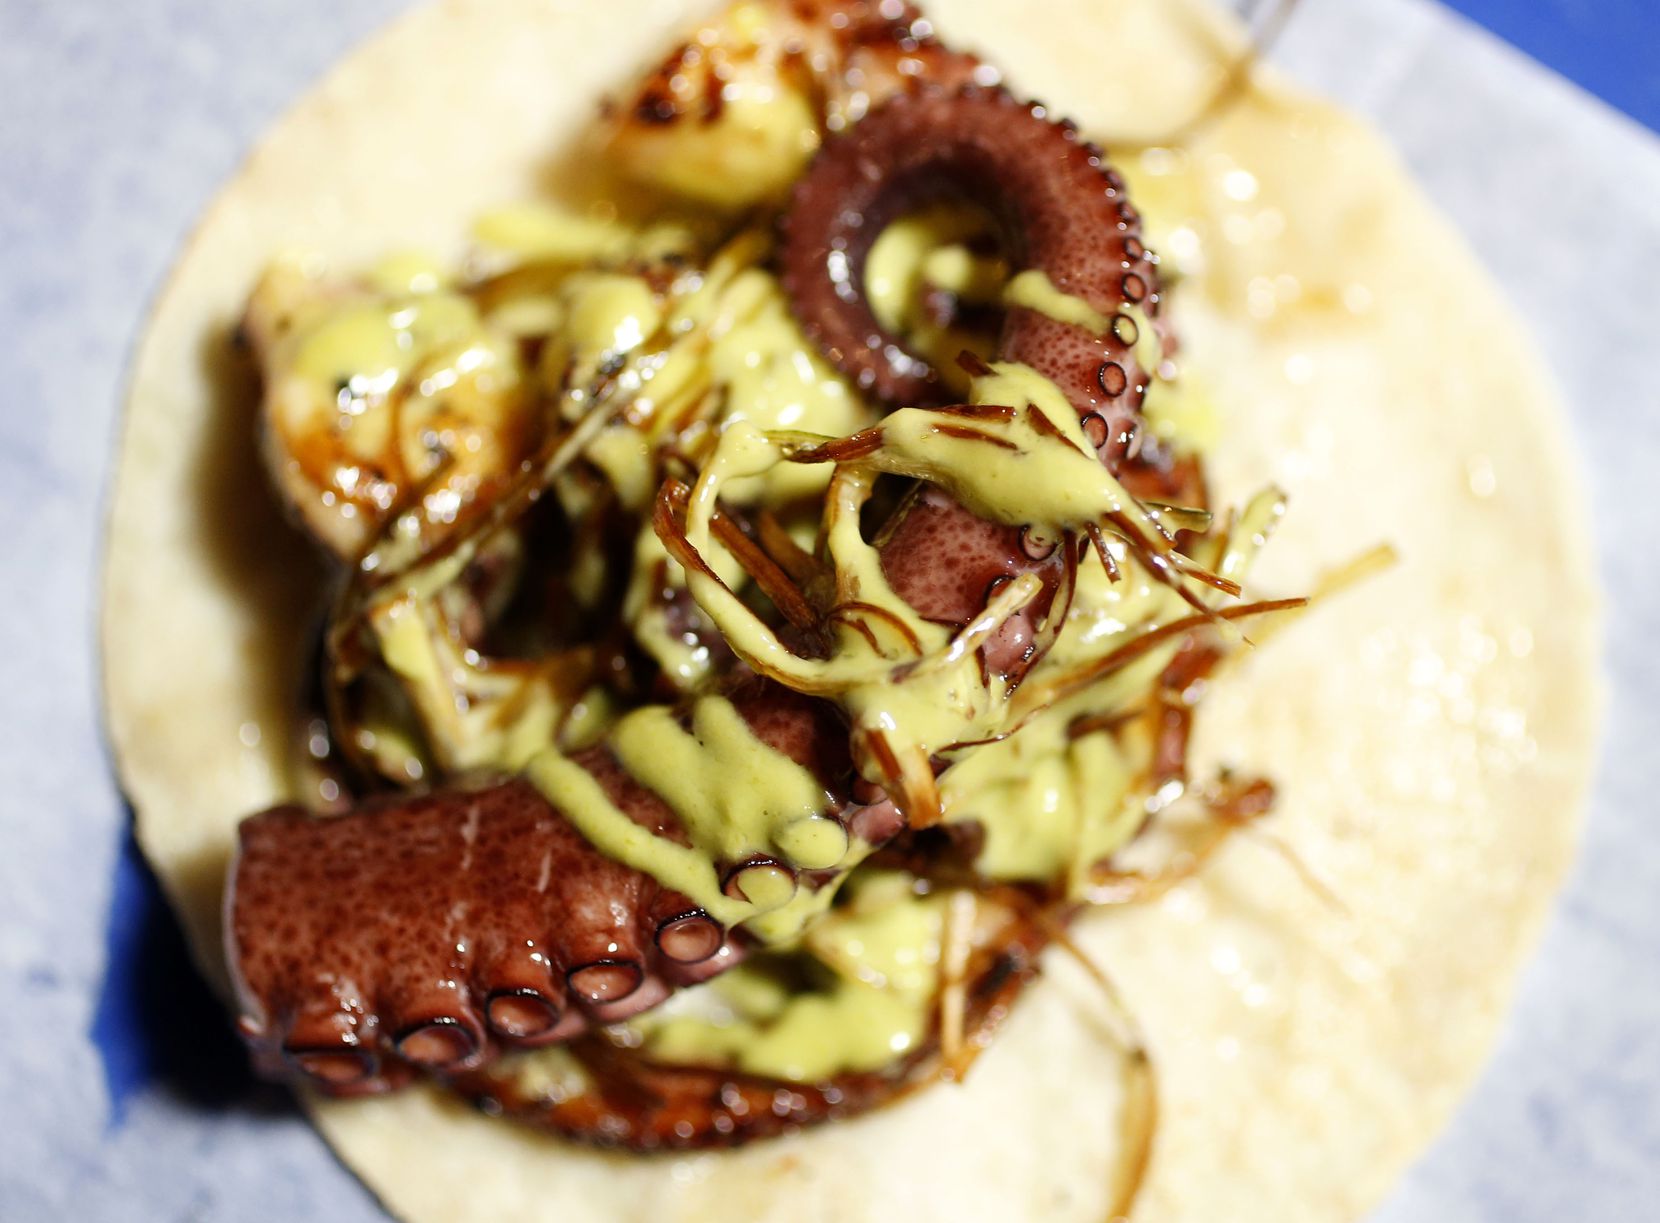 One of the popular dishes at Revolver Taco Lounge in Deep Ellum is the pulpo (octopus) taco. The restaurant in Dallas is open for takeout and delivery.